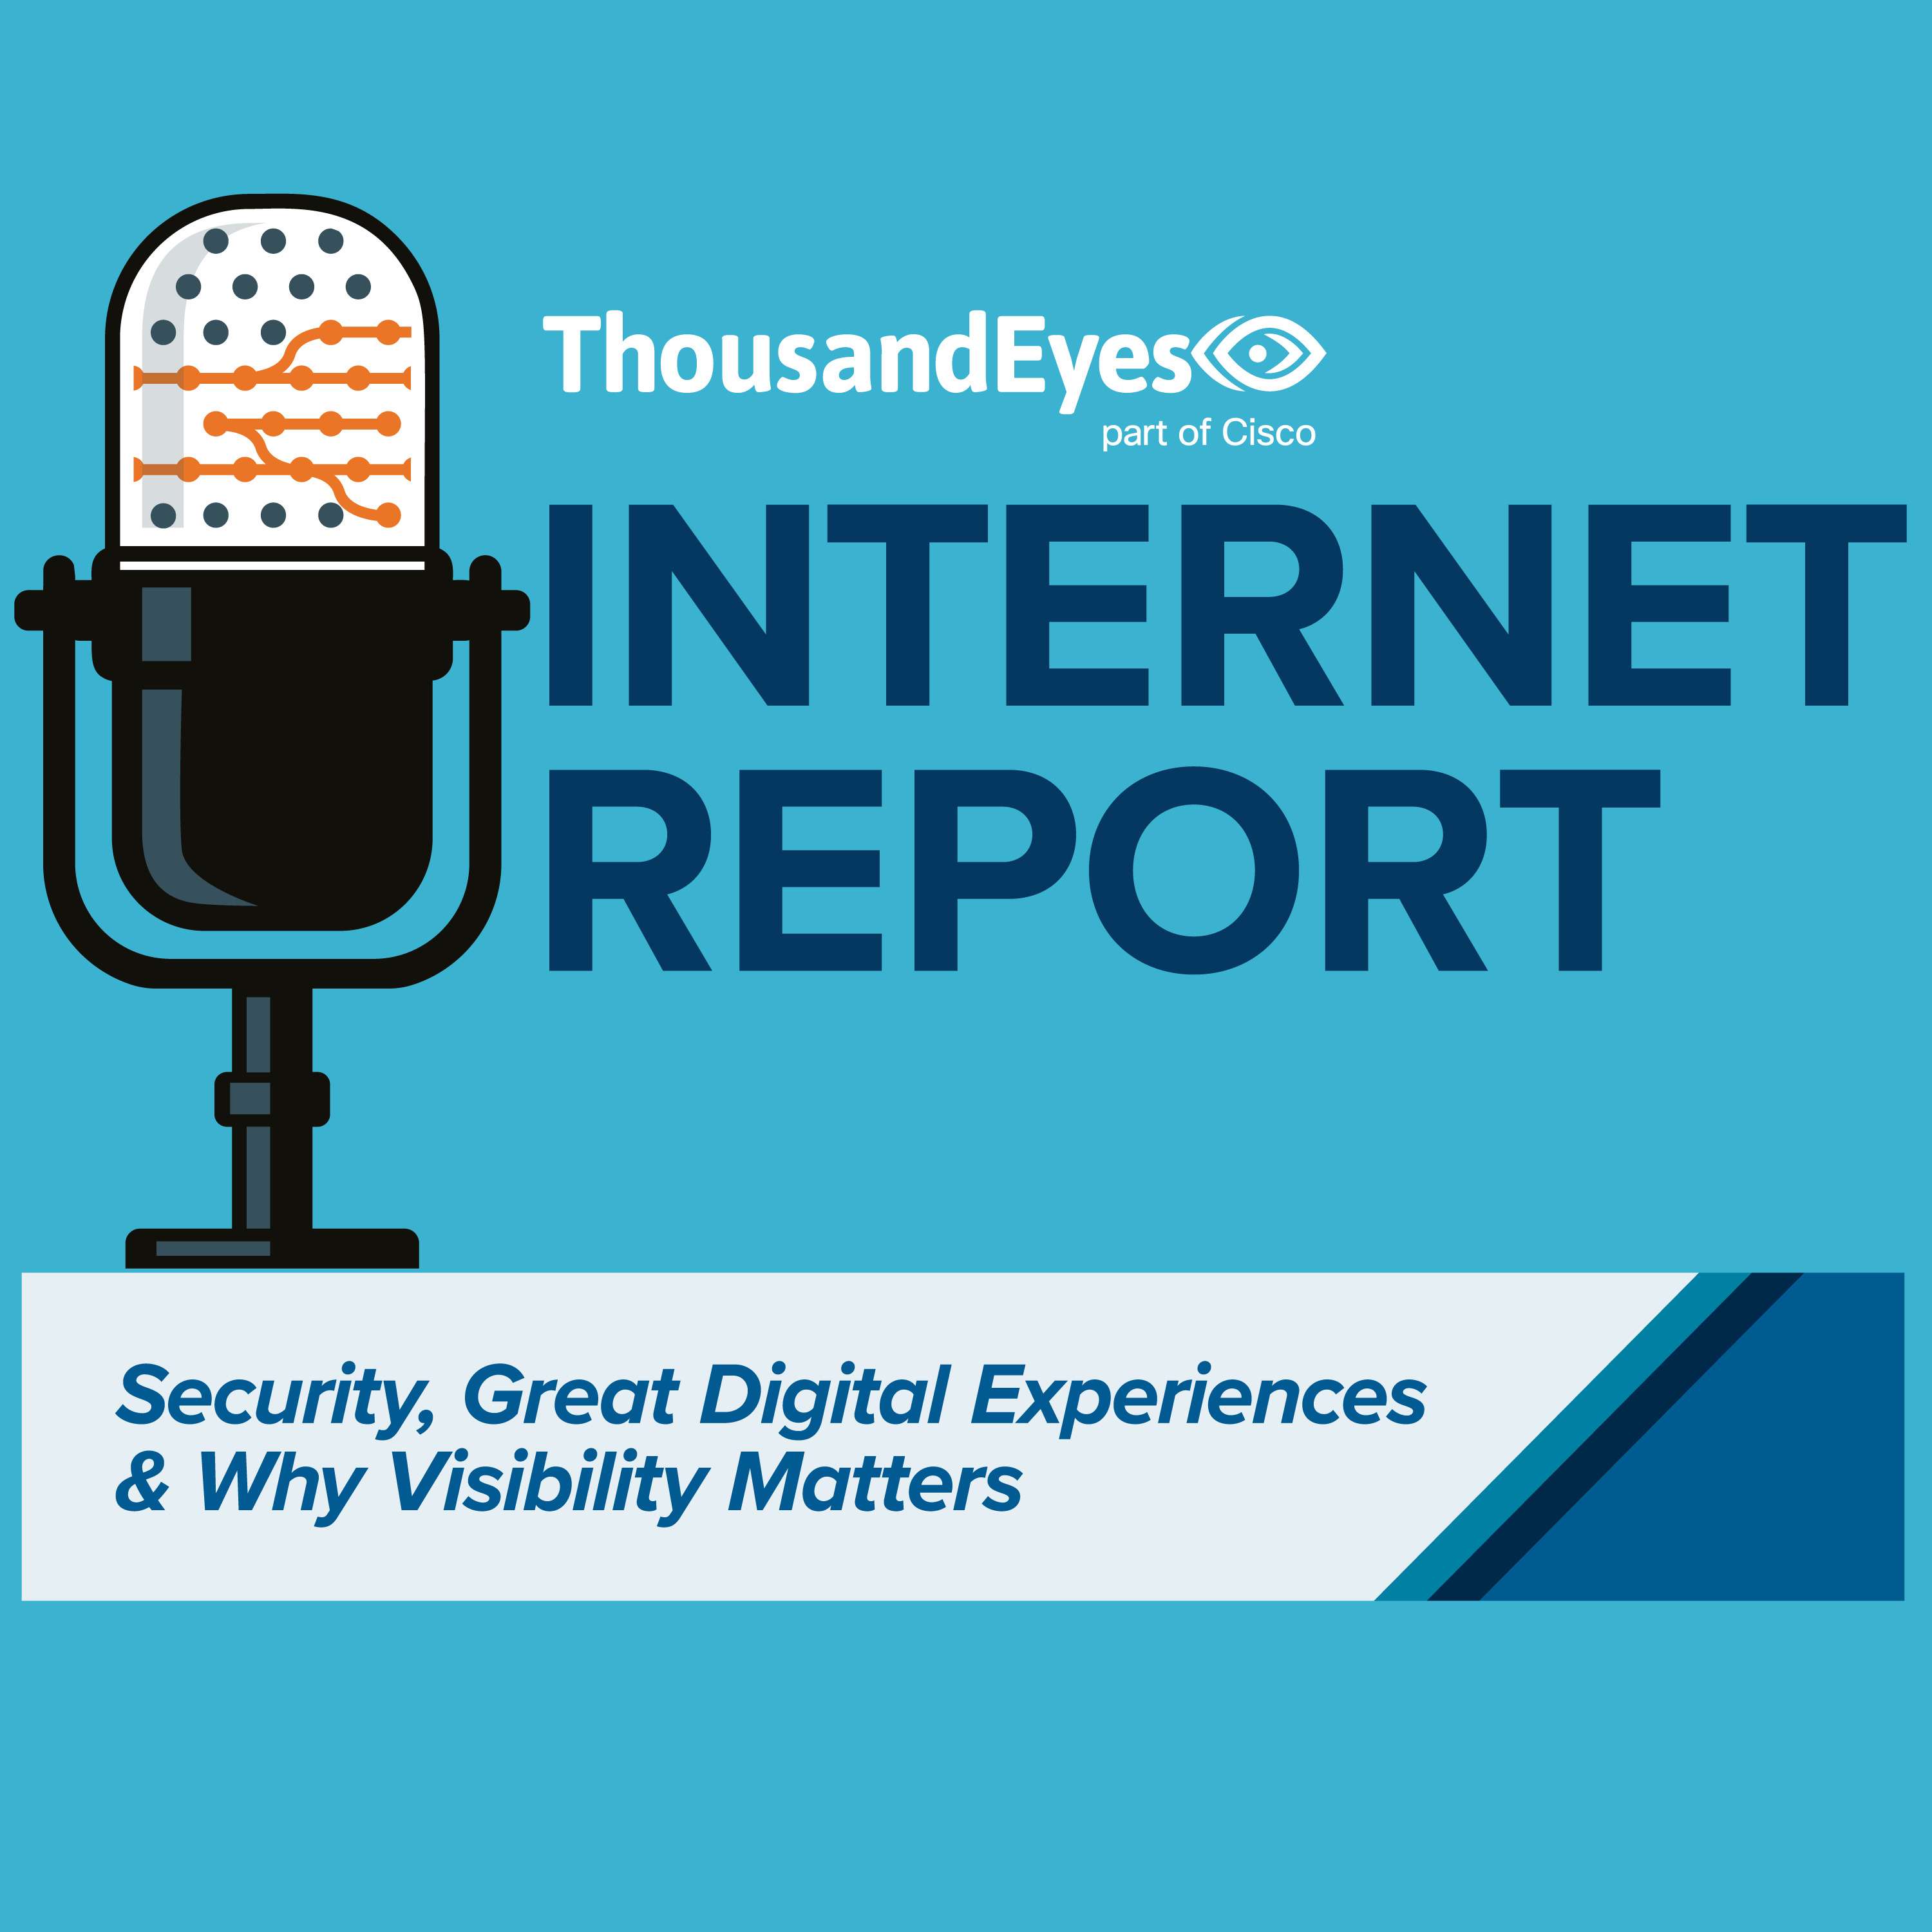 Security, Great Digital Experiences & Why Visibility Matters